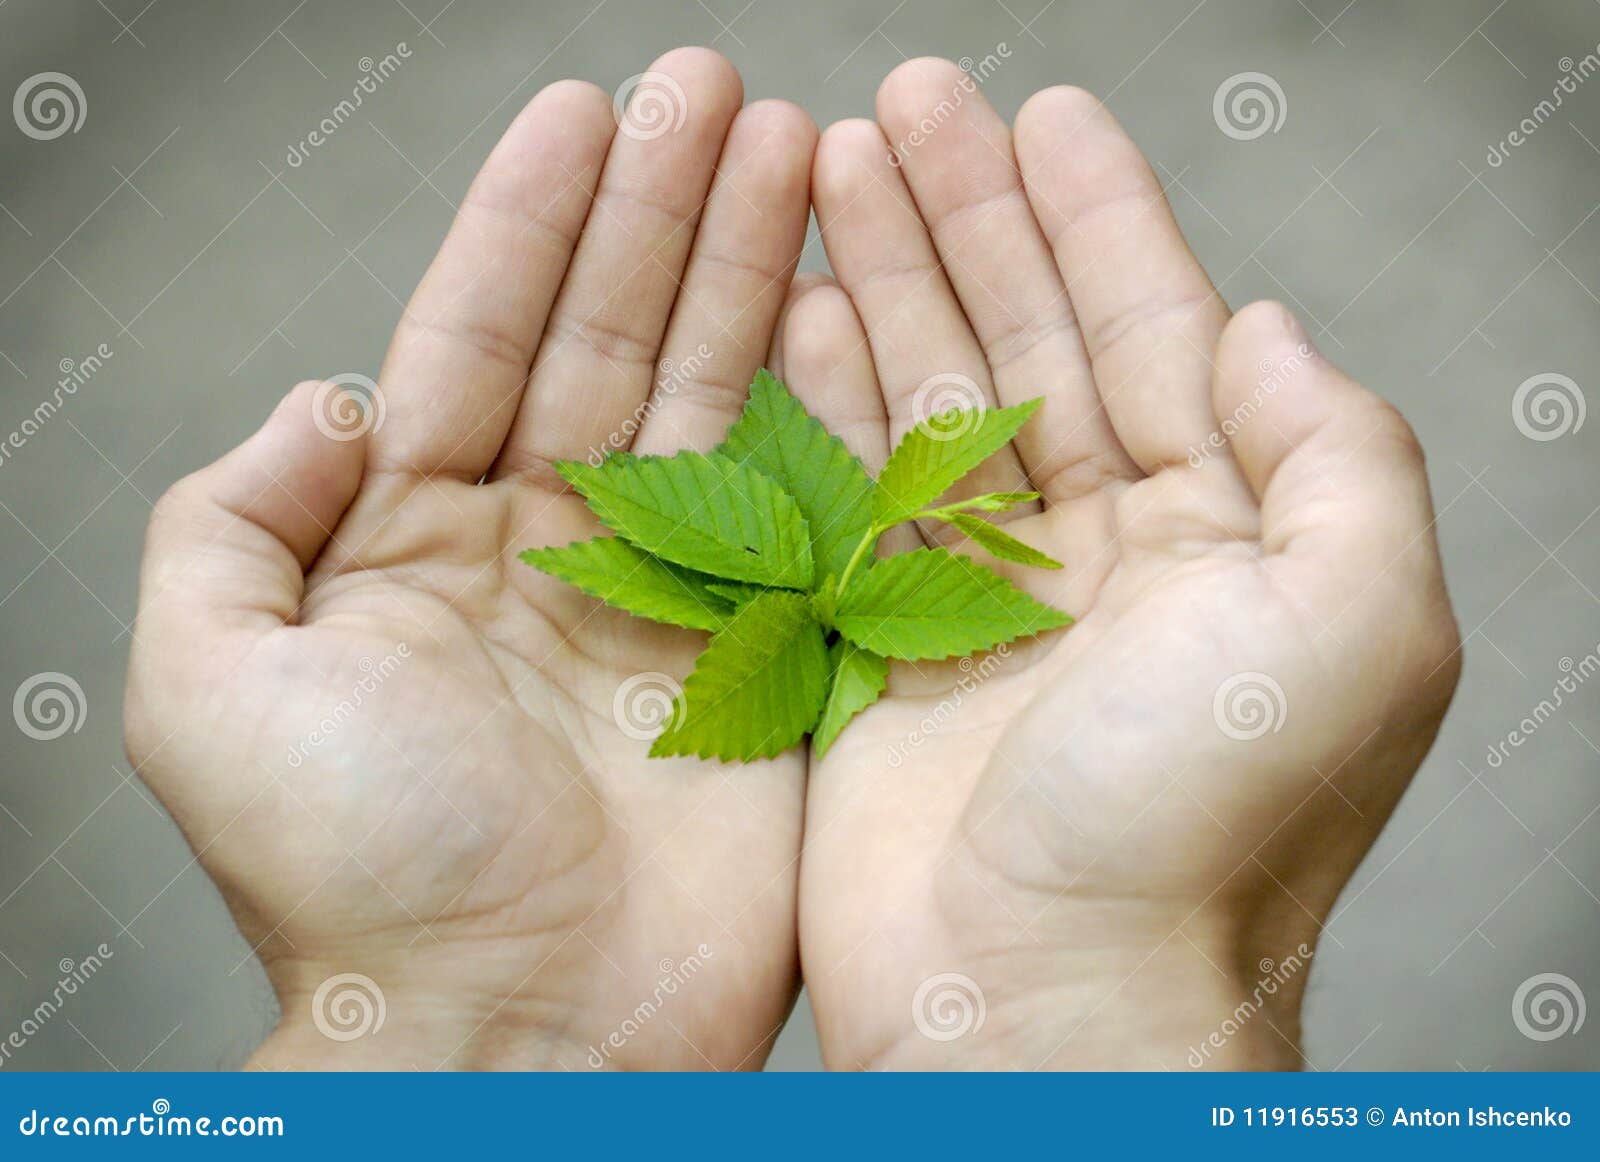 New Life In Our Hands Stock Image Image Of Sprout Leaf